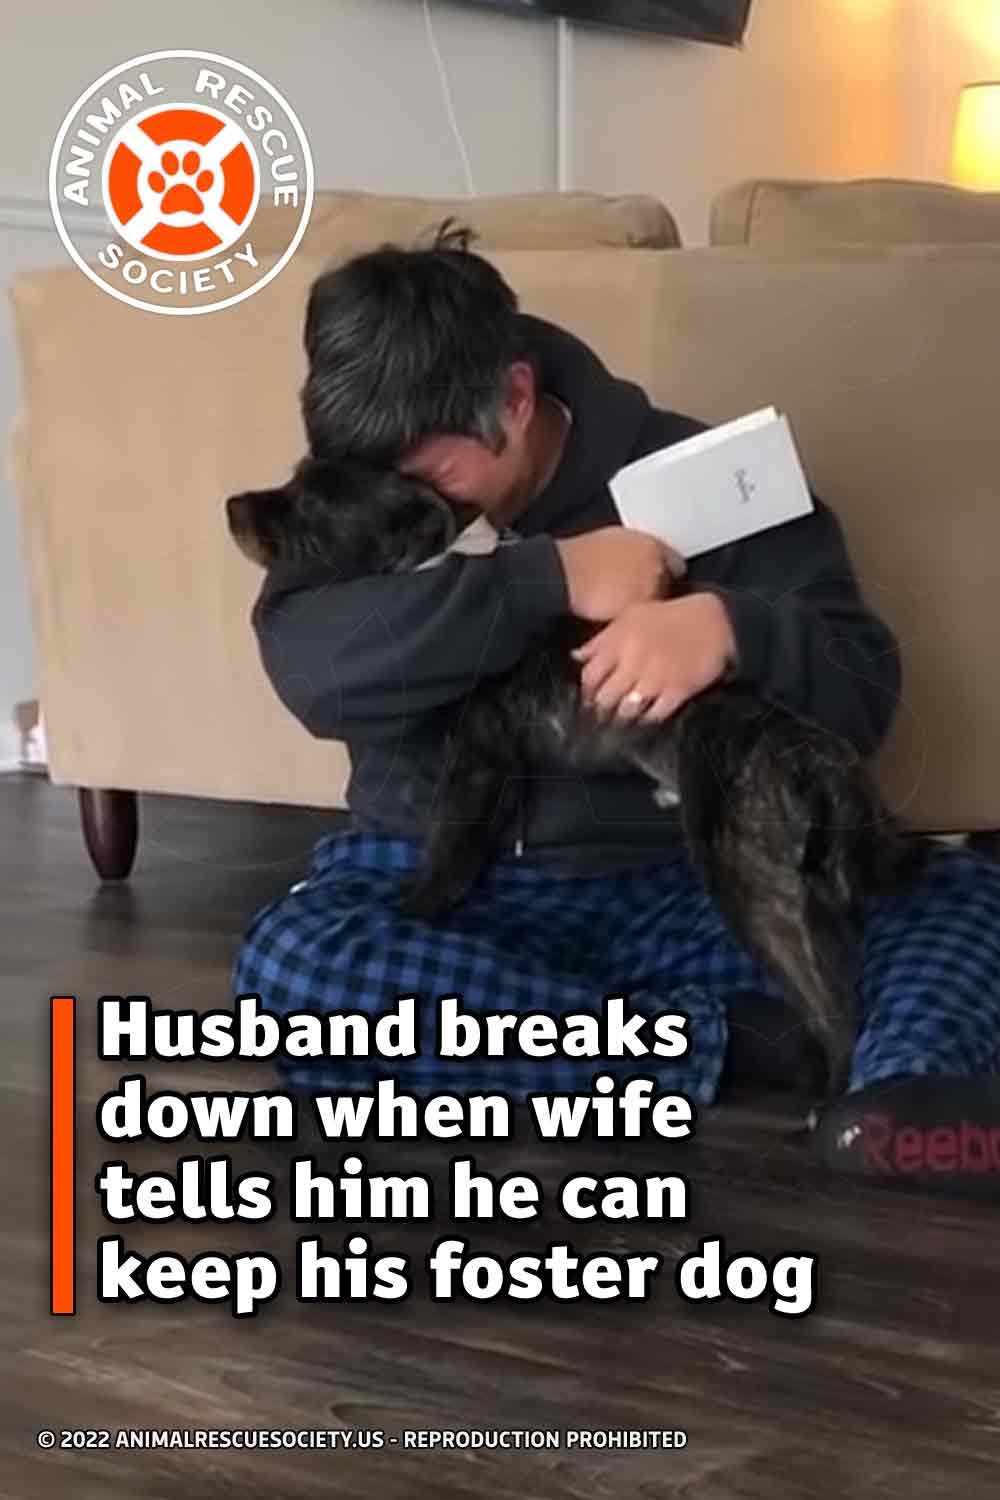 Husband breaks down when wife tells him he can keep his foster dog